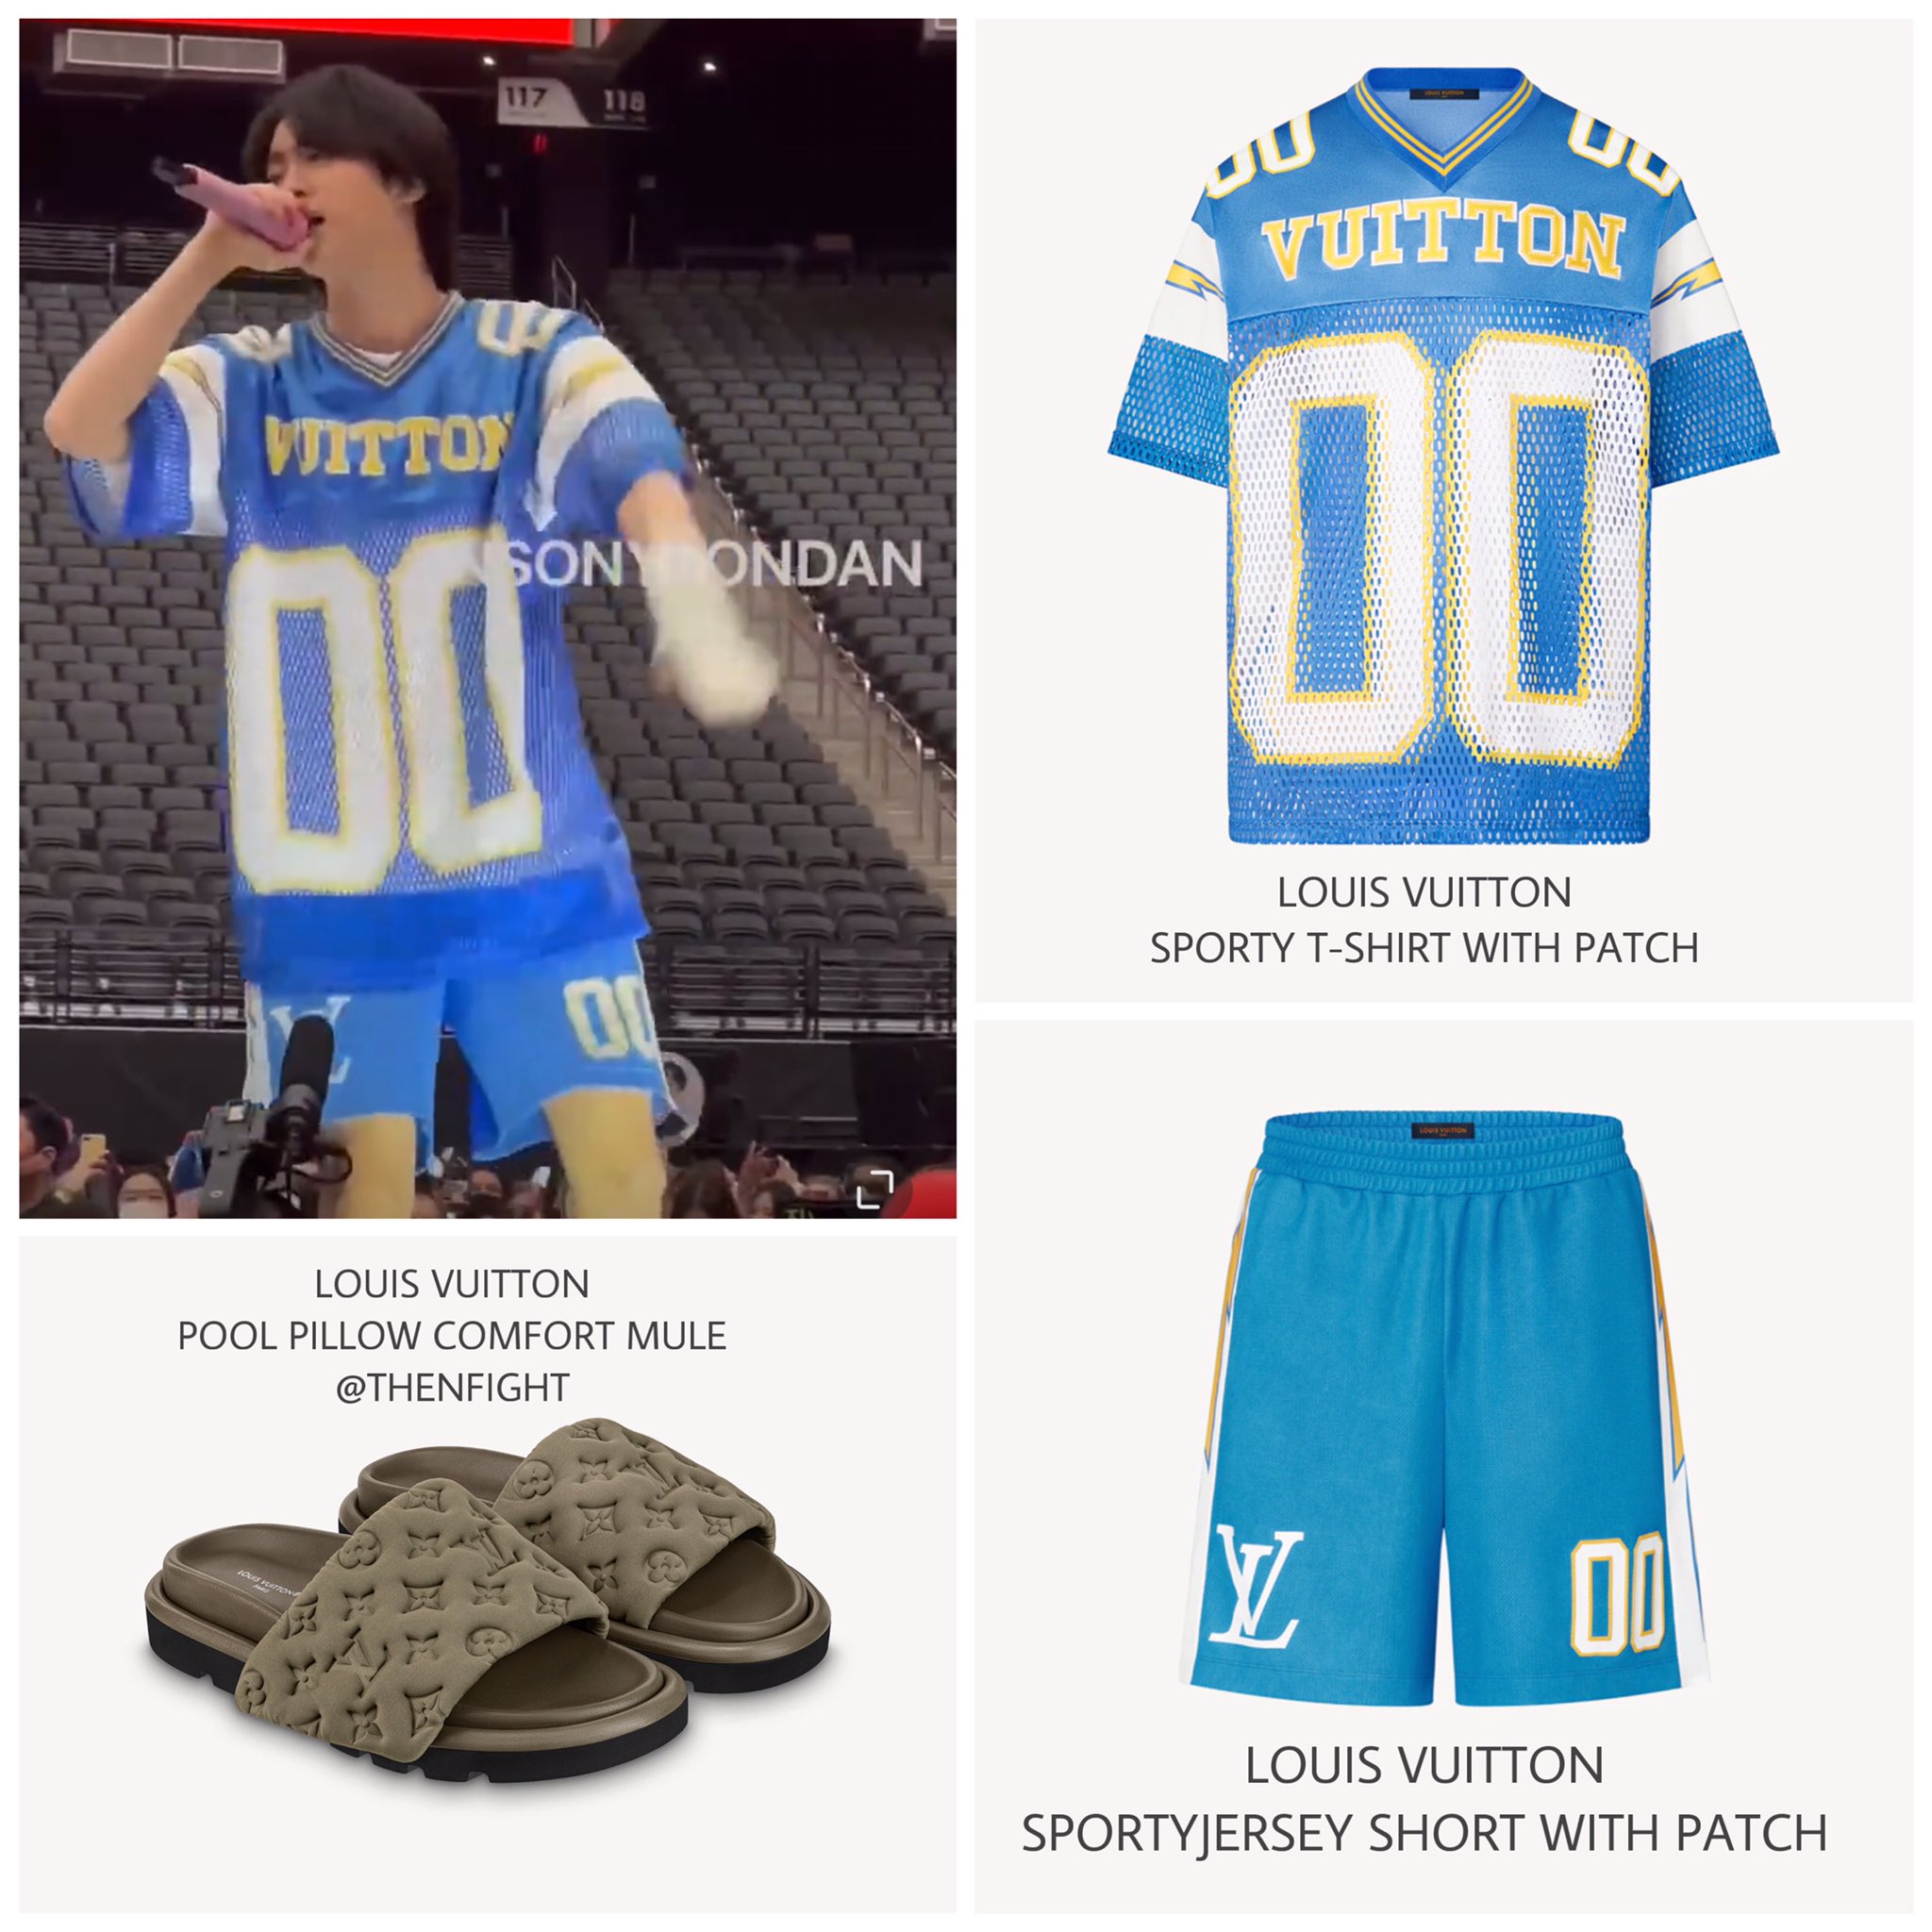 THENFIGHT on X: 220310 BTS PERMISSION TO DANCE ON STAGE IN SEOUL  SOUNDCHECK #BTS #방탄소년단 LOUIS VUITTON OFF-WHITE CARHARTT GUCCI TOM FORD  SYSTEM  / X